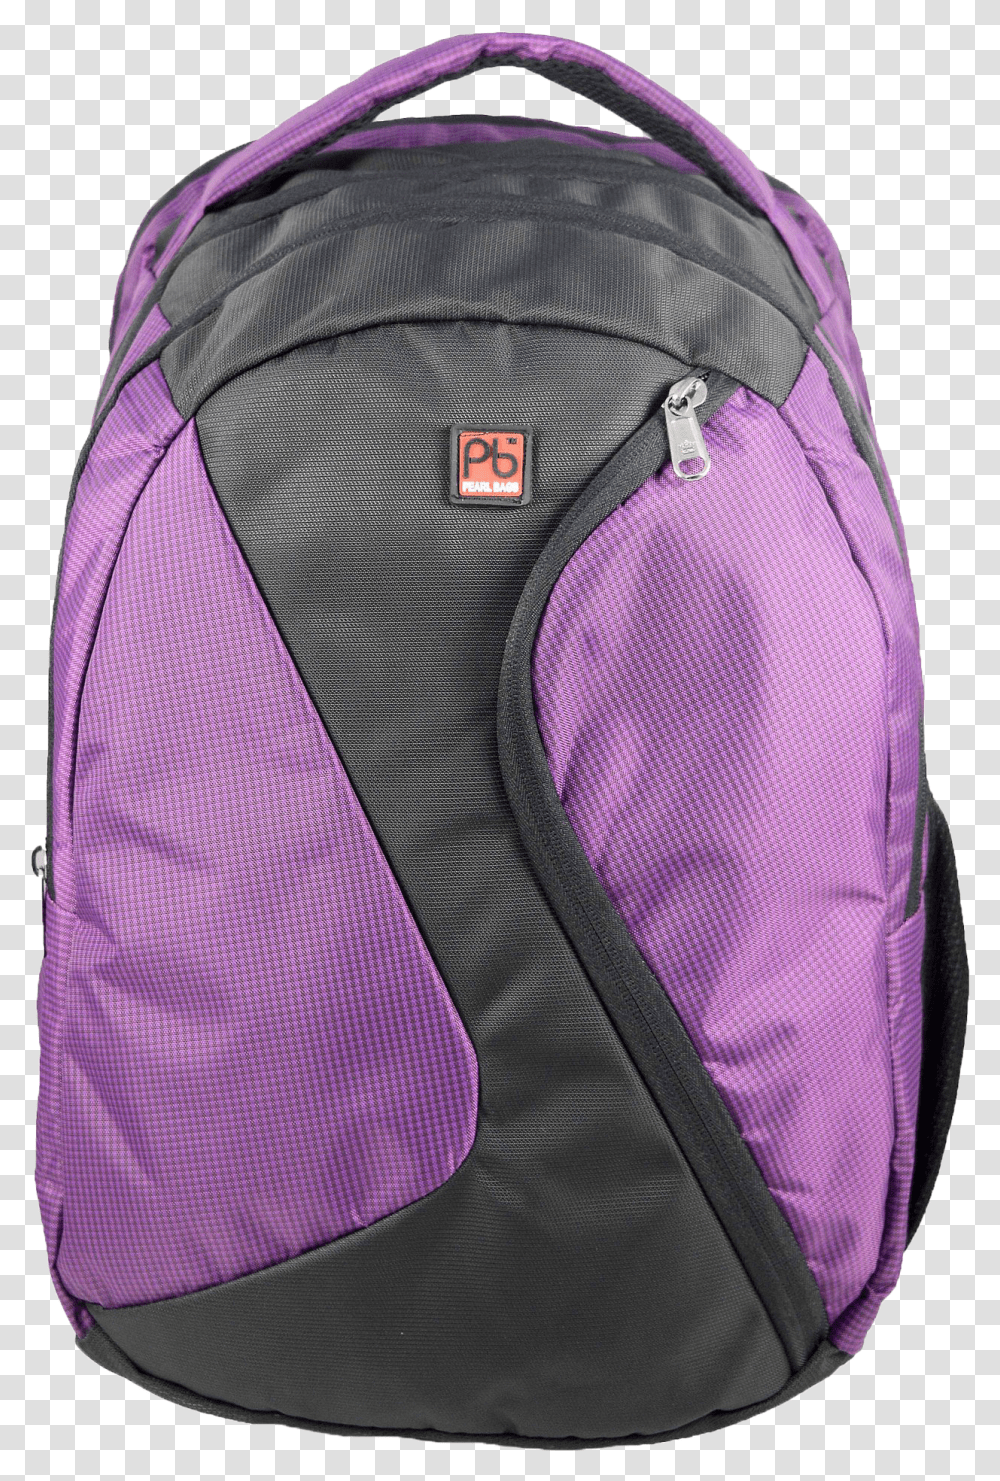 Black And Purple School Bag Front View College Bag Transparent Png